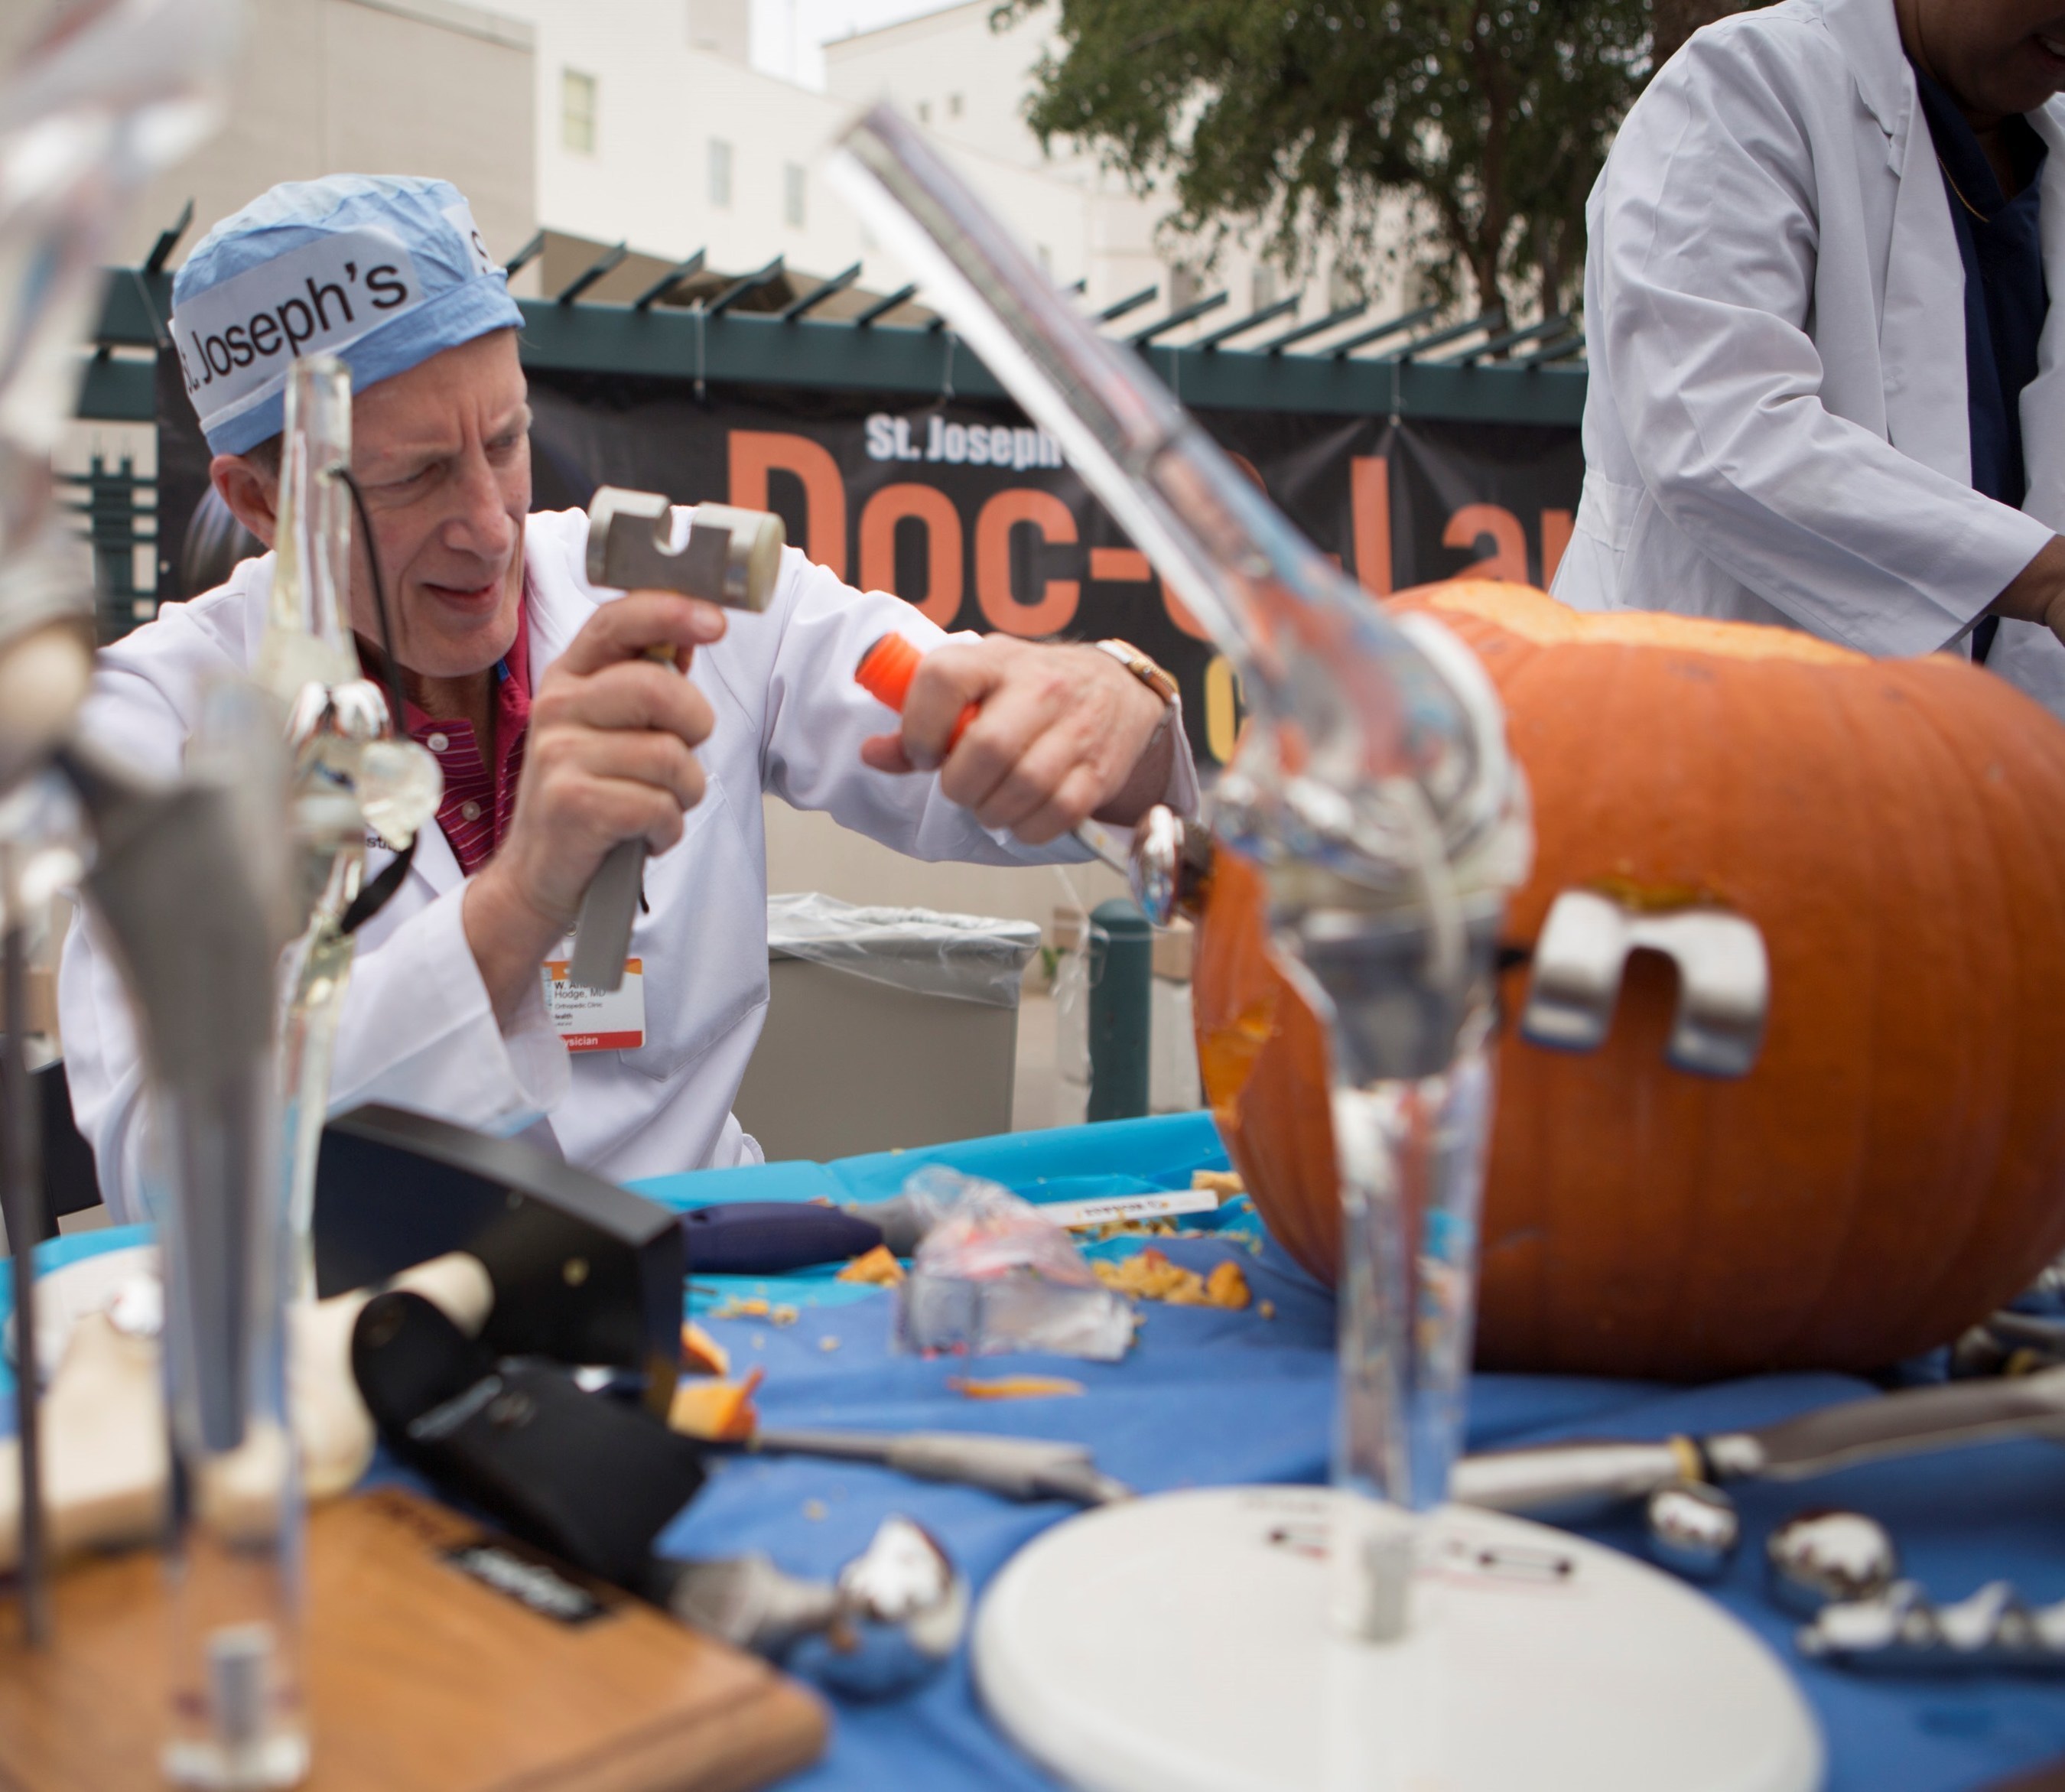 Dr. Andrew Hodge did the first-ever joint replacement on a pumpkin. Ouch!